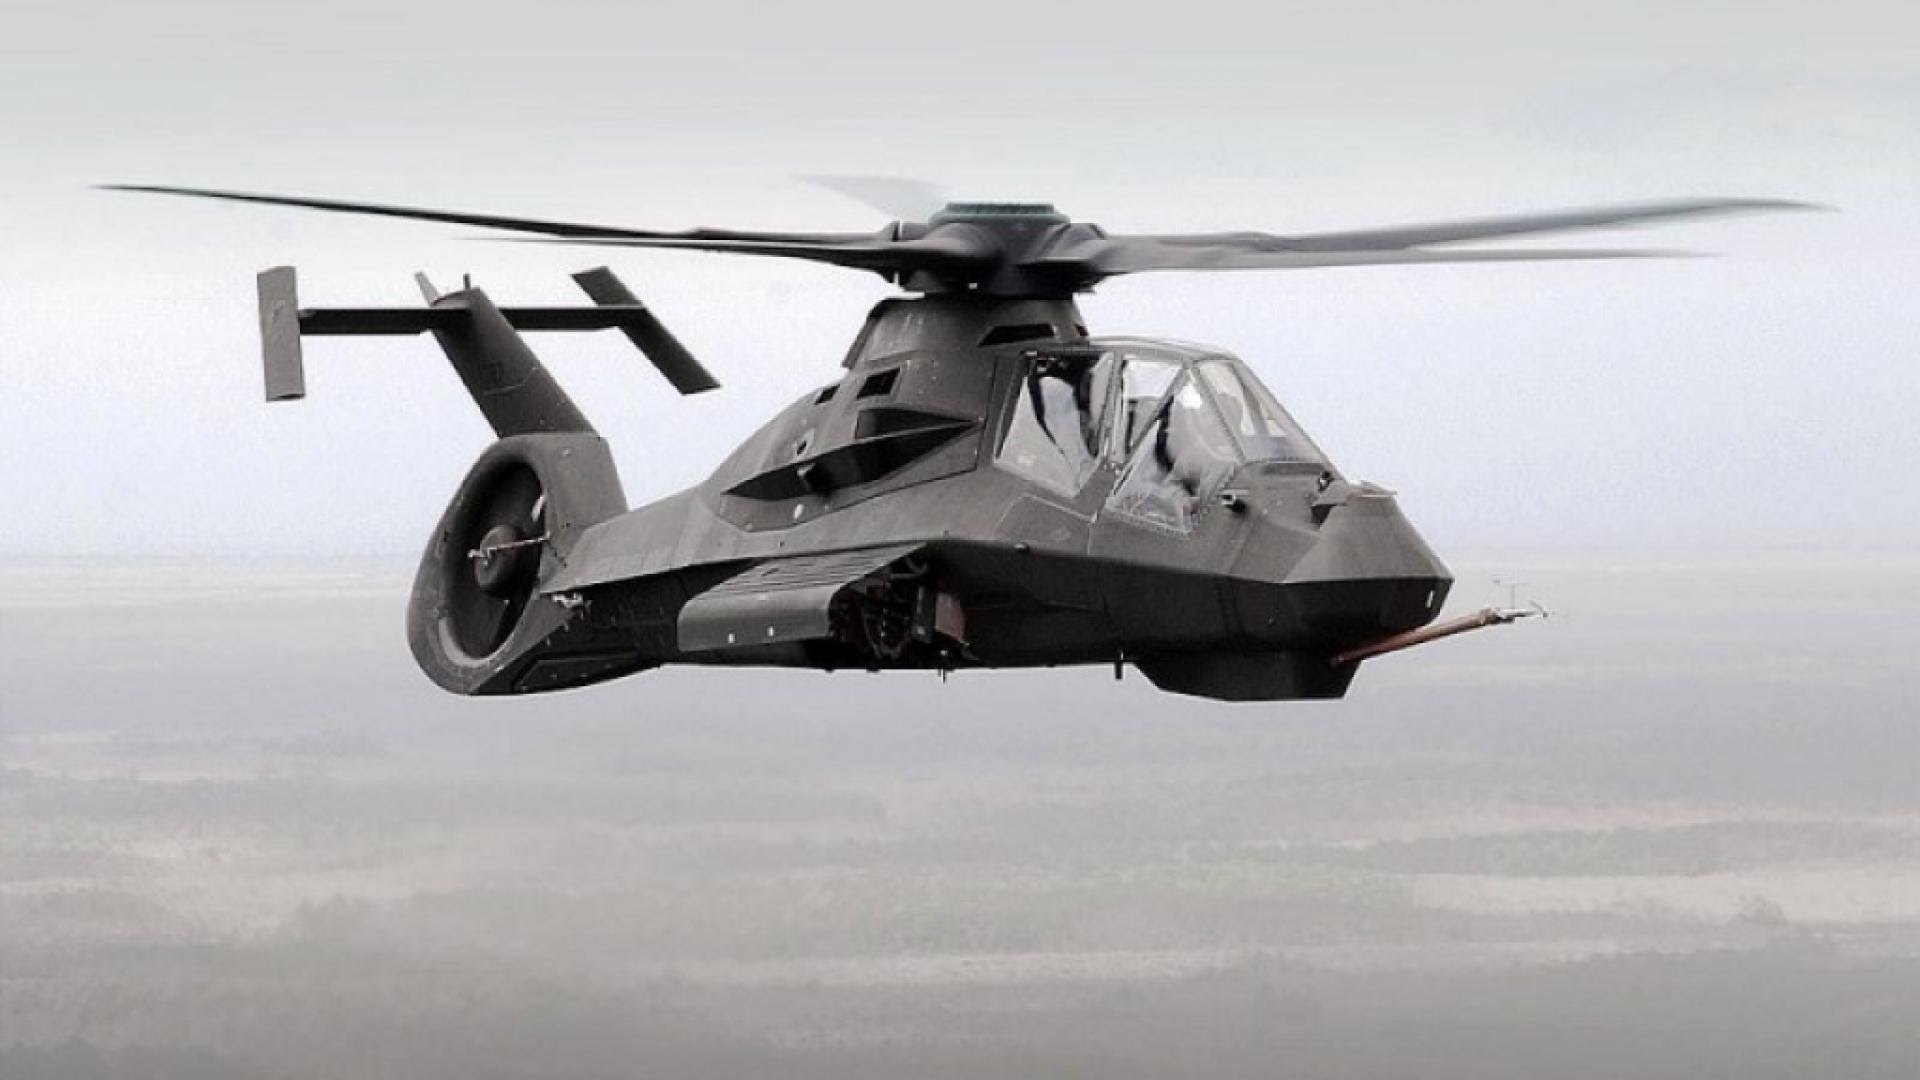 Top 10 Best Attack Helicopters In The World 2016 - YouTube